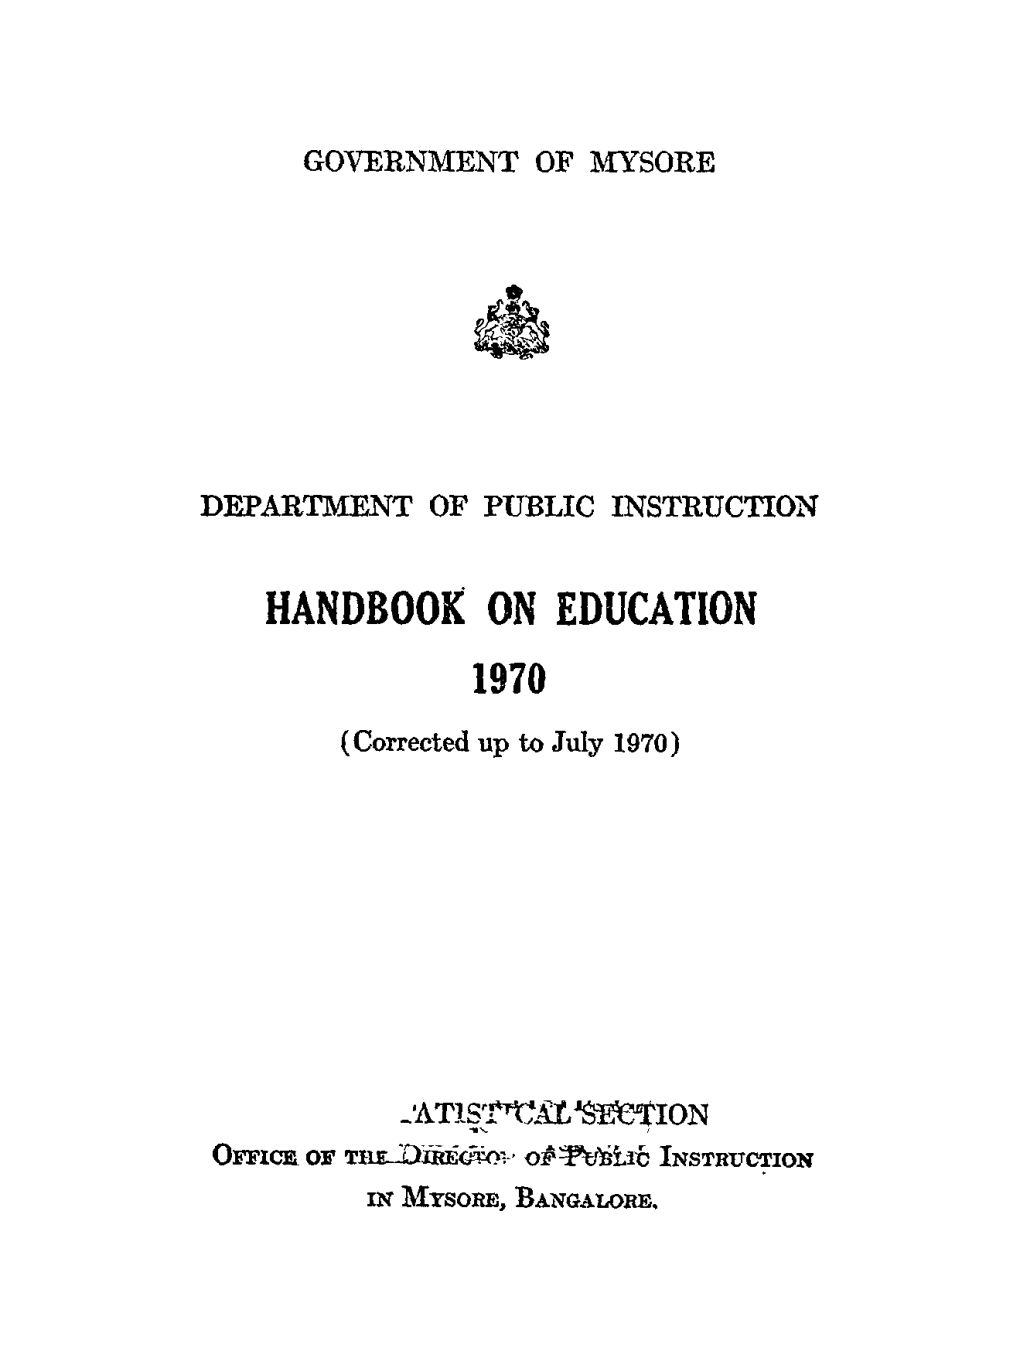 HANDBOOK on EDUCATION 1970 (Corrected up to July 1970)